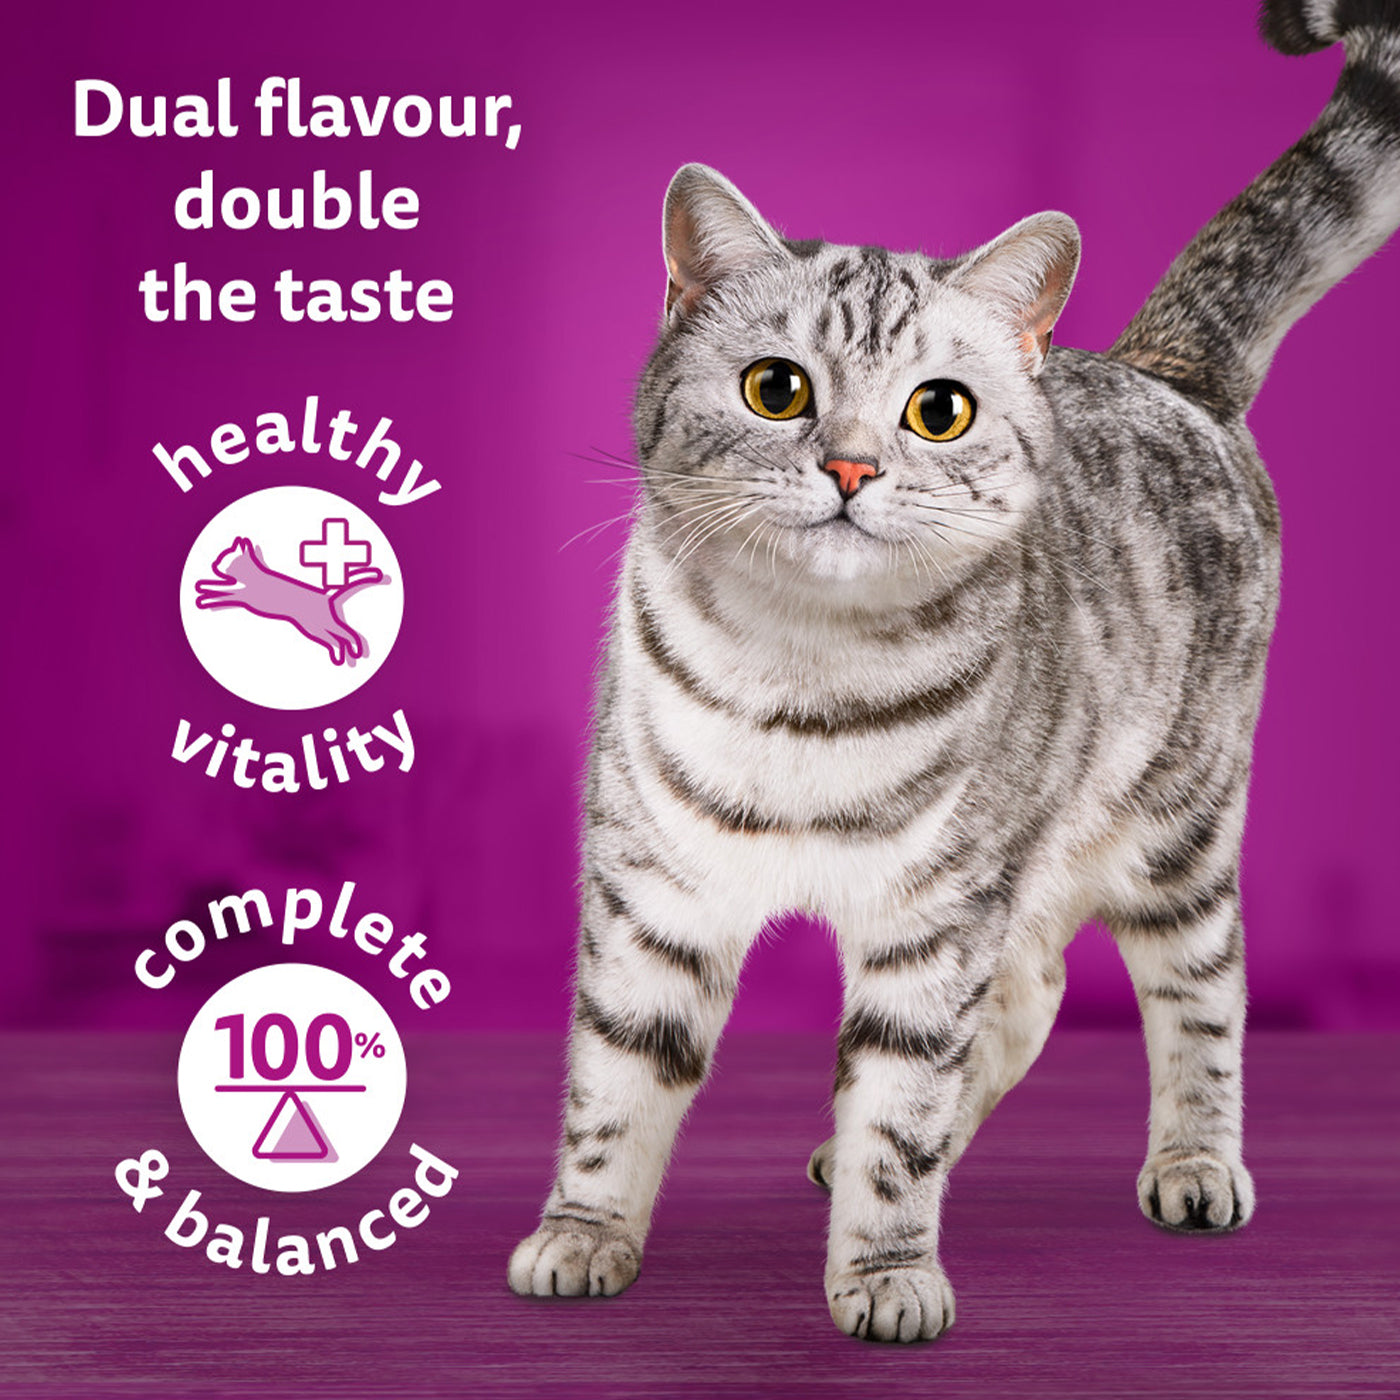 Whiskas 1+ Cat Duo Surf & Turf in Jelly (12x85g)